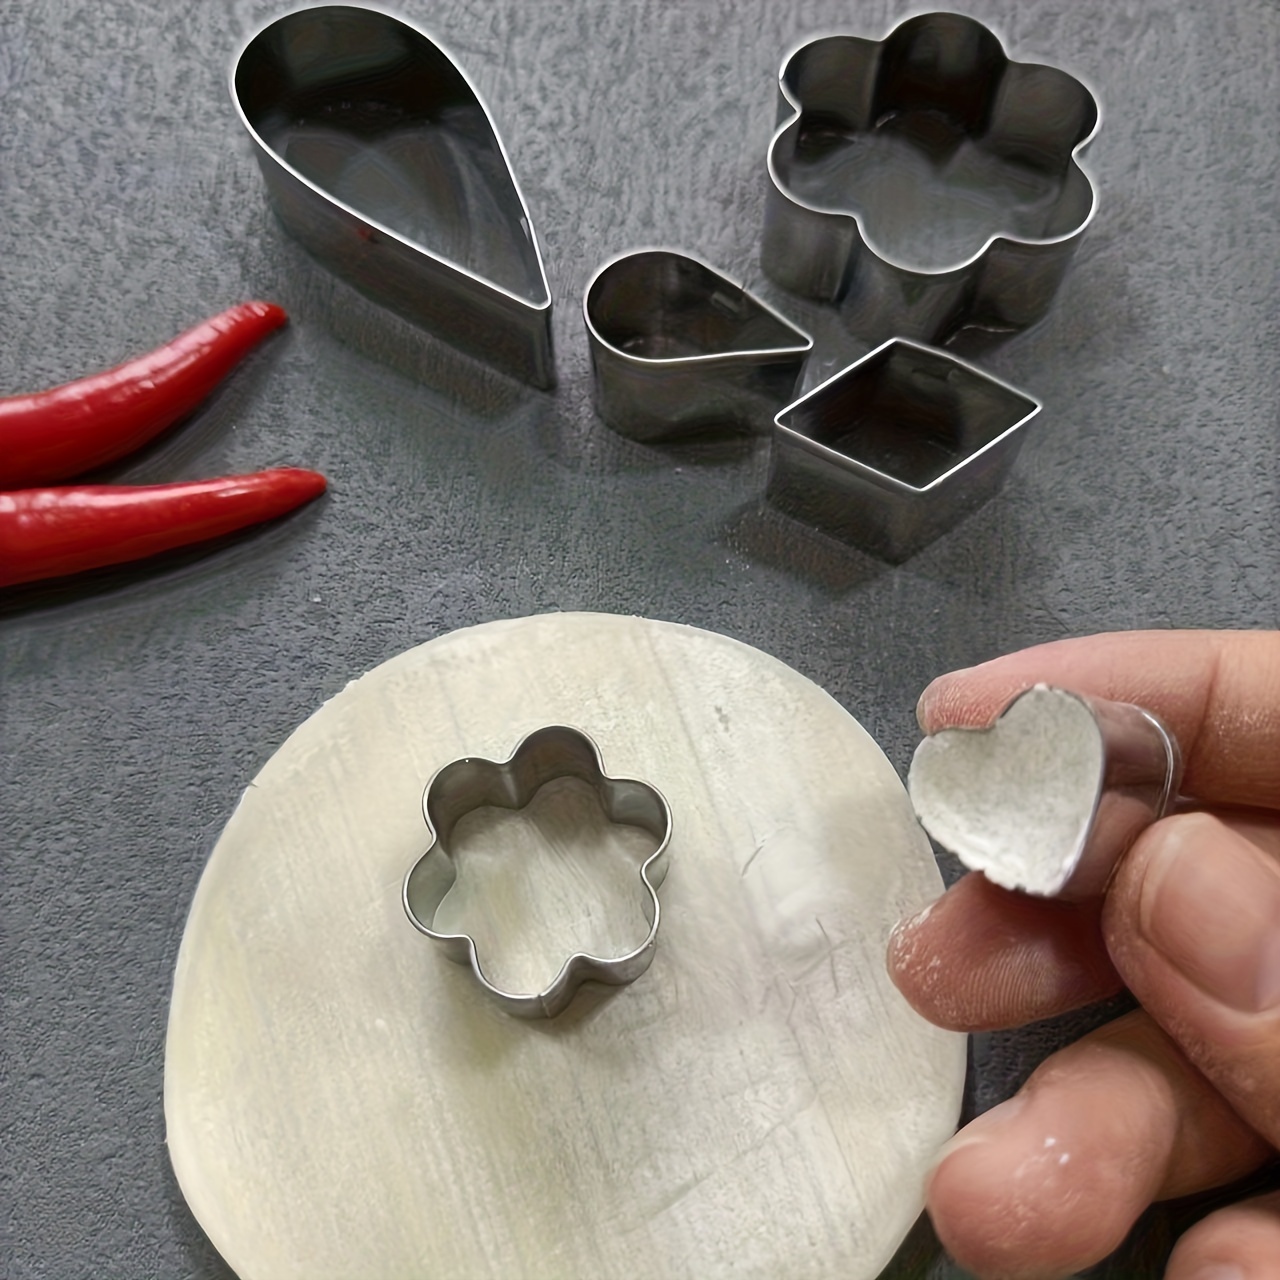 Mini Cookie Cutter Shapes Set - 24 Pieces Stainless Steel Metal Small Molds - Flower, Heart, Star, Geometric Shapes - Cut Fondant, Pastry, Mousse Cake